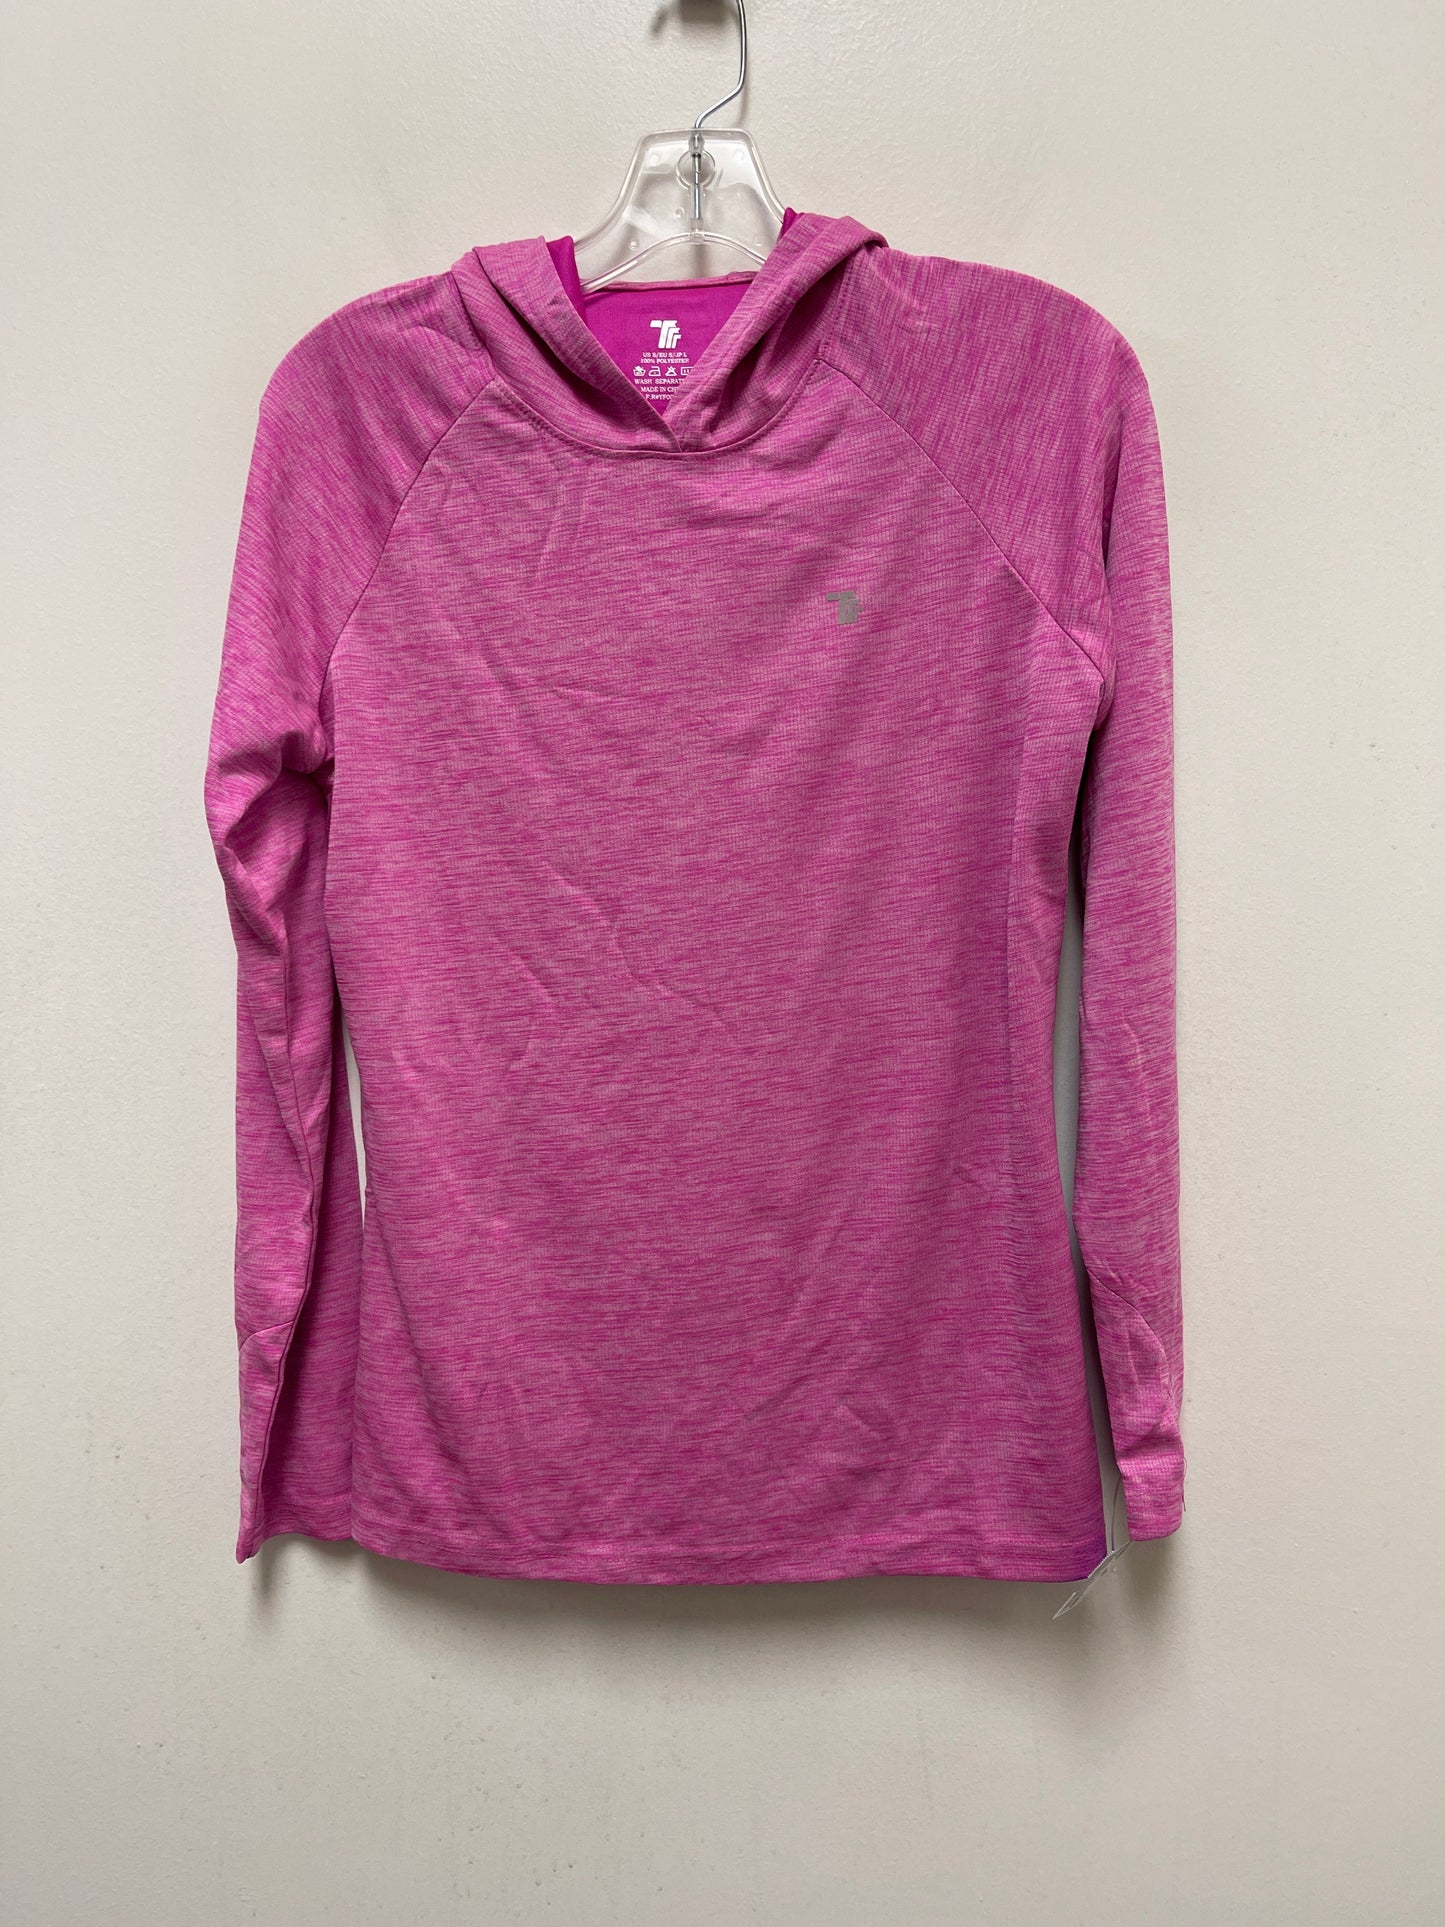 Pink Athletic Top Long Sleeve Collar Clothes Mentor, Size L